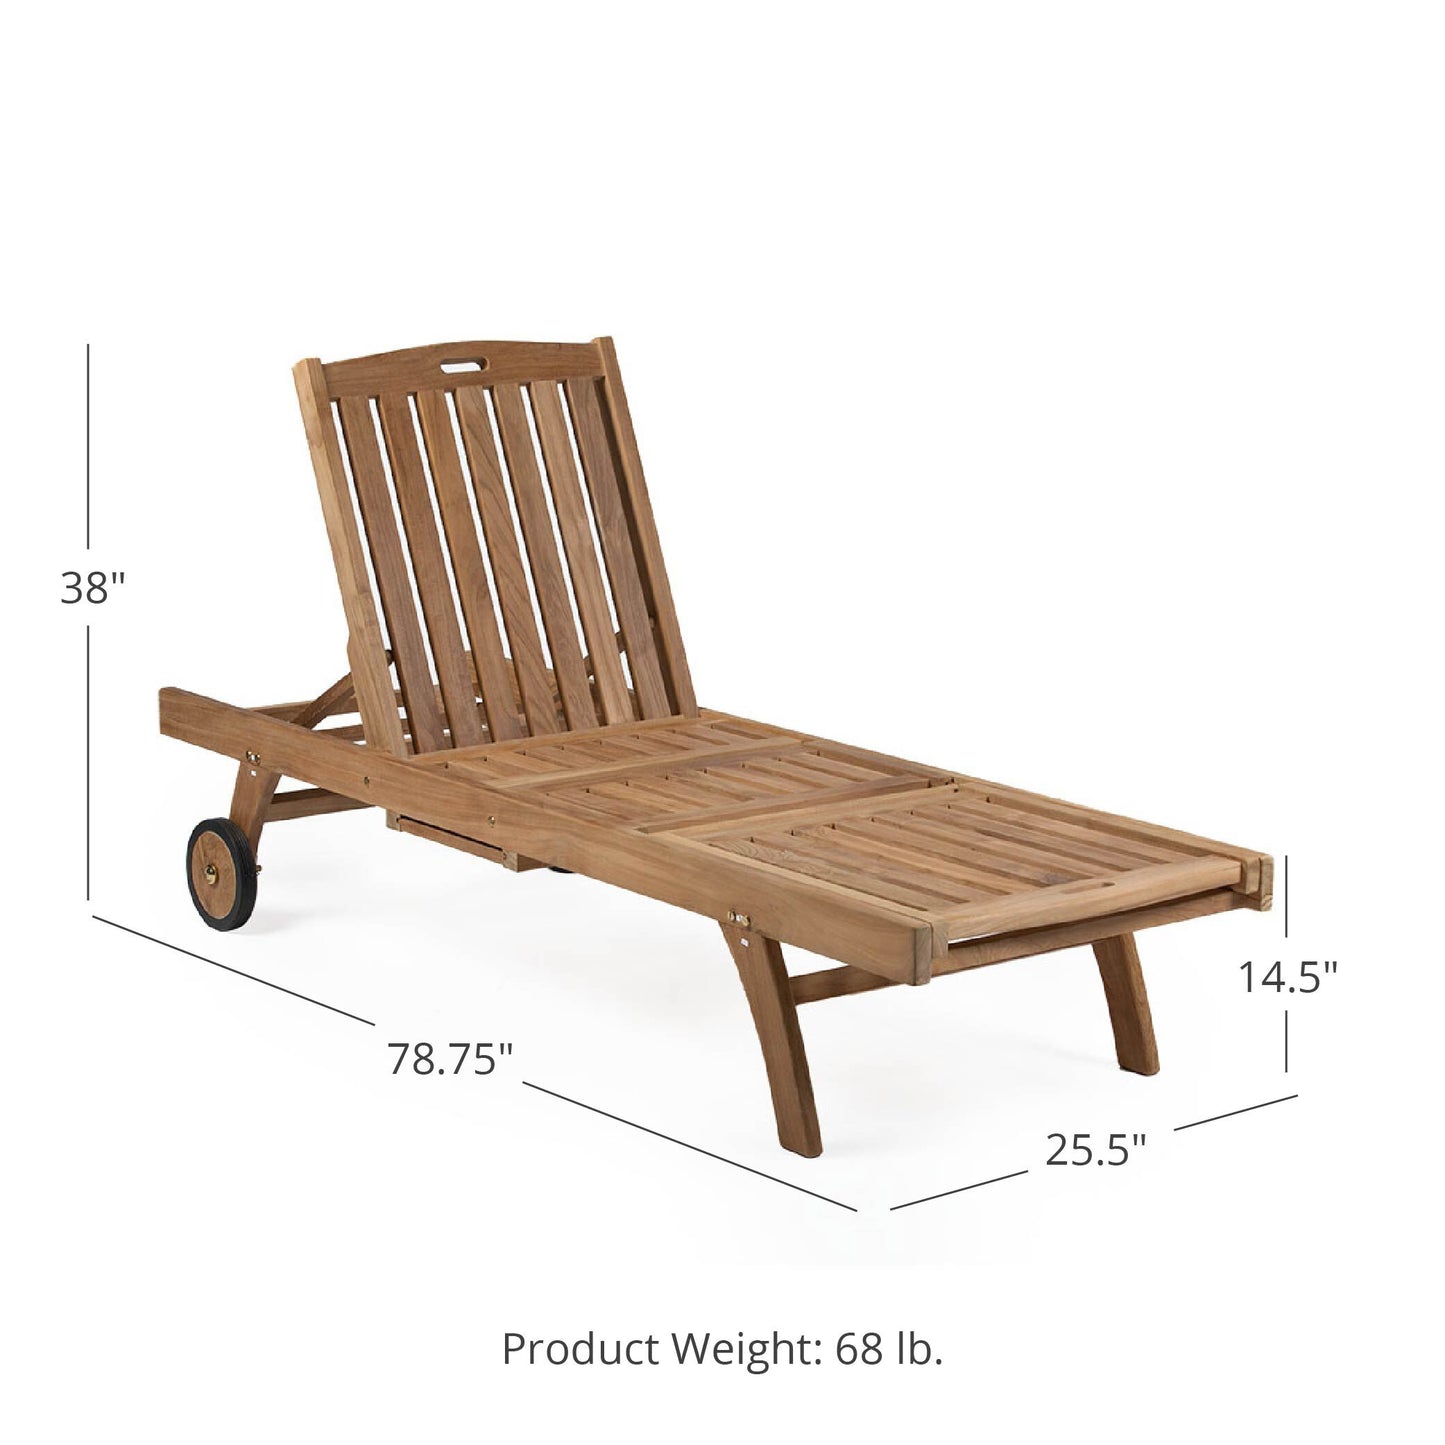 Hawthorne Grade A Teak Reclining Lounger with Optional Armrests - Optional Armrests: No Armrests | No Armrests - view 20